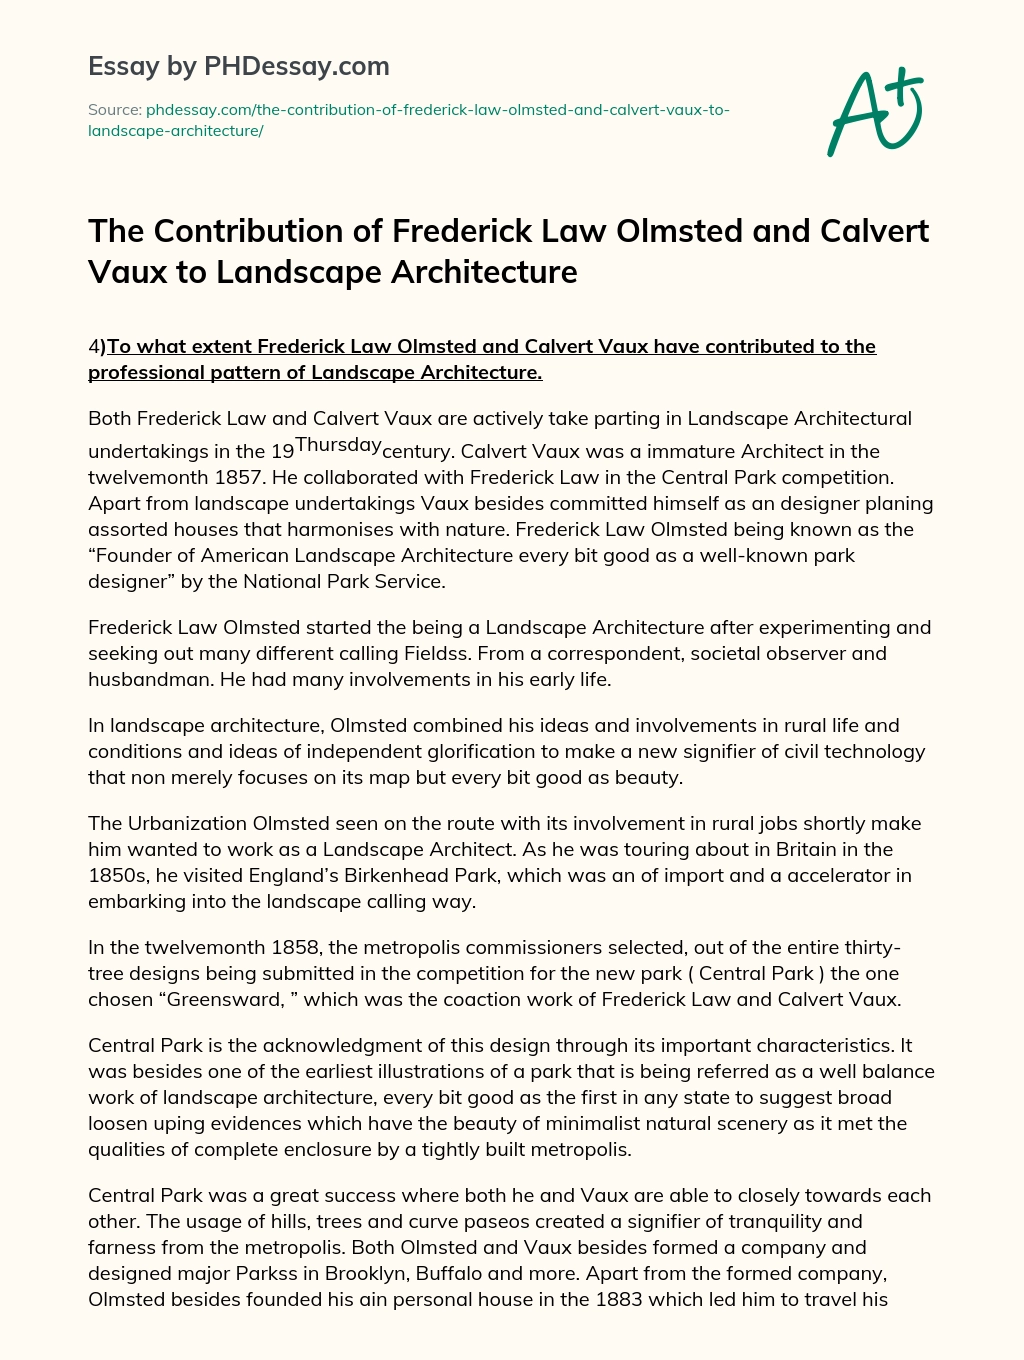 The Contribution of Frederick Law Olmsted and Calvert Vaux to Landscape Architecture essay